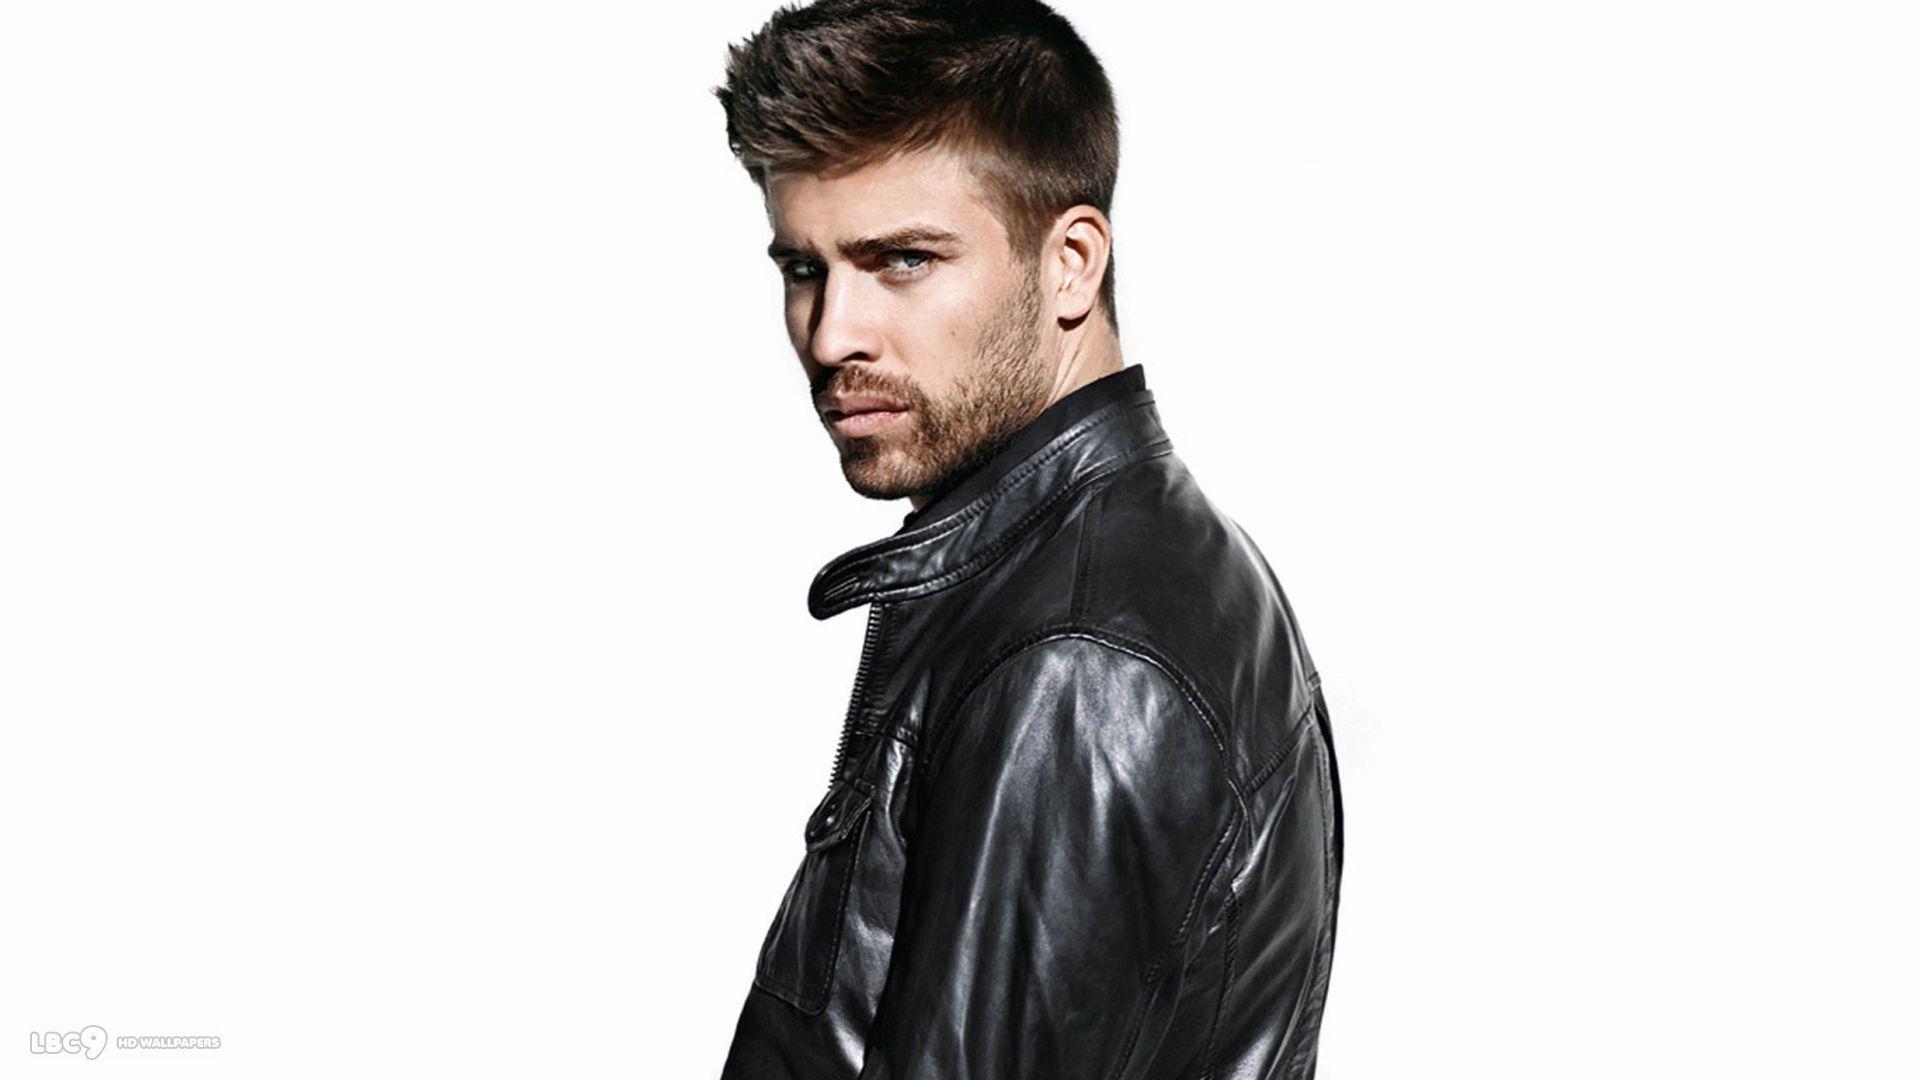 Gerard Pique Soccer player Picture and Wallpaper FIFA